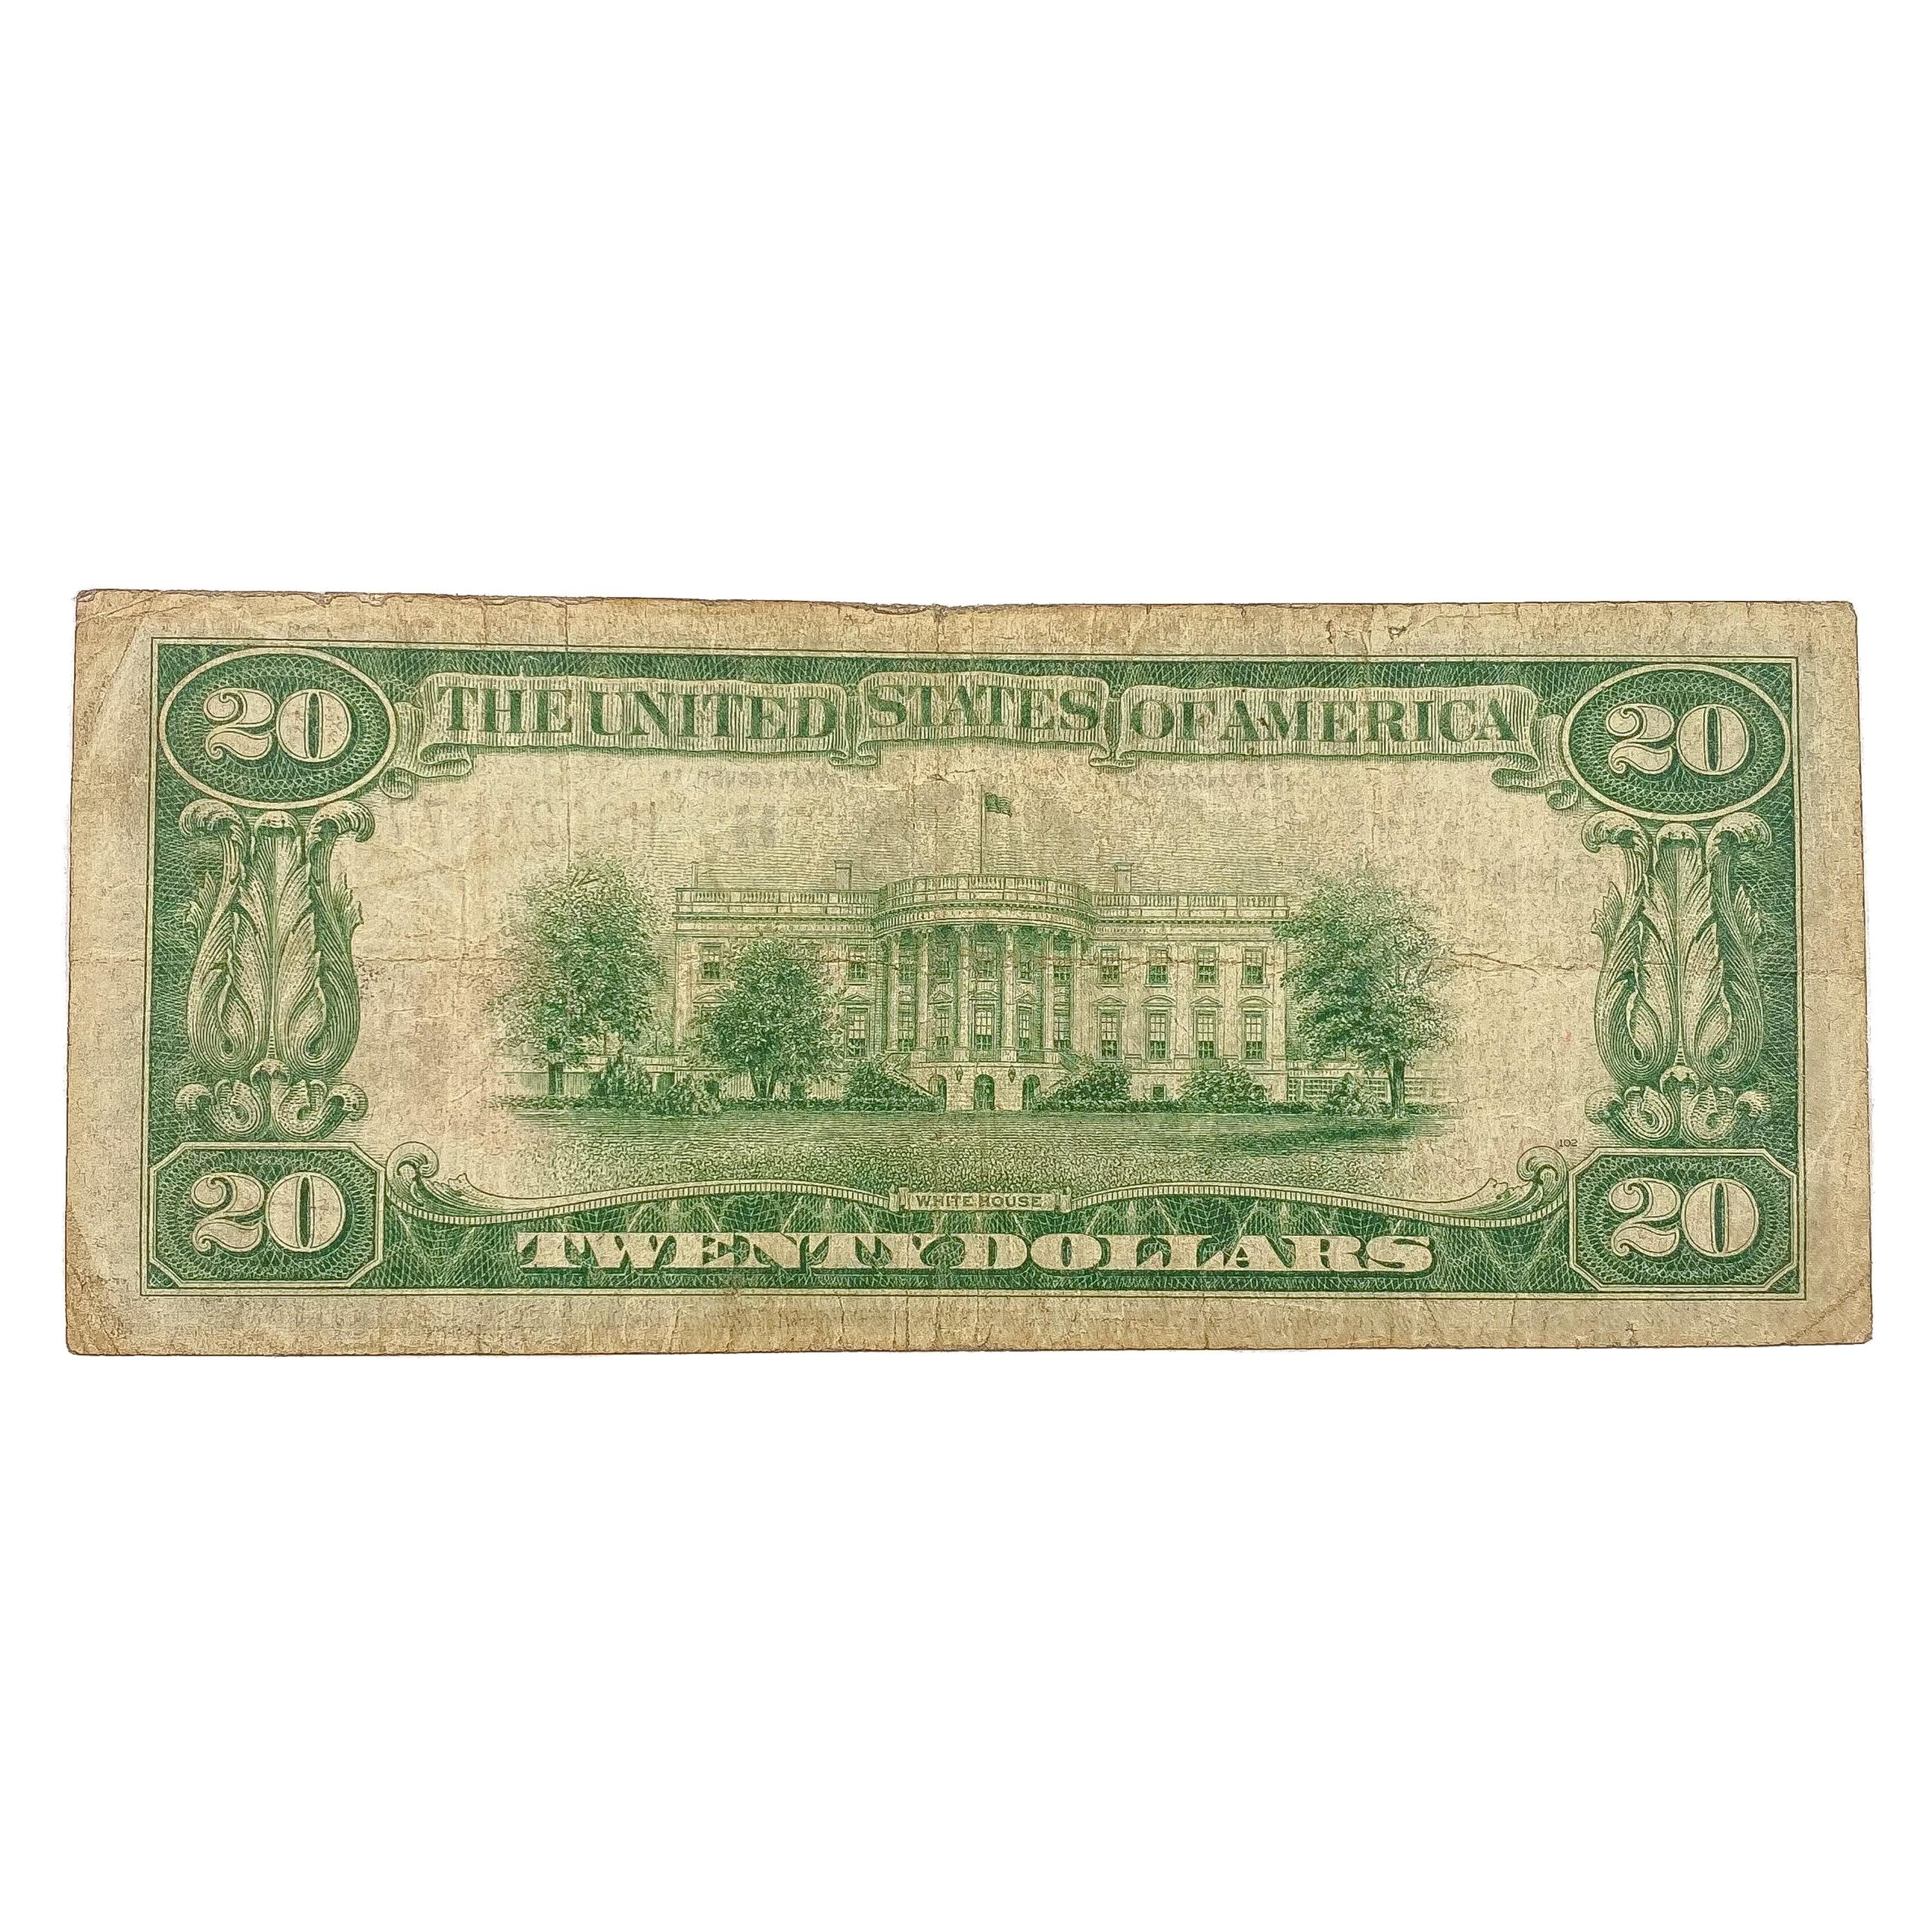 1929 $20 US St Louis Bank, MO Fed Res Note